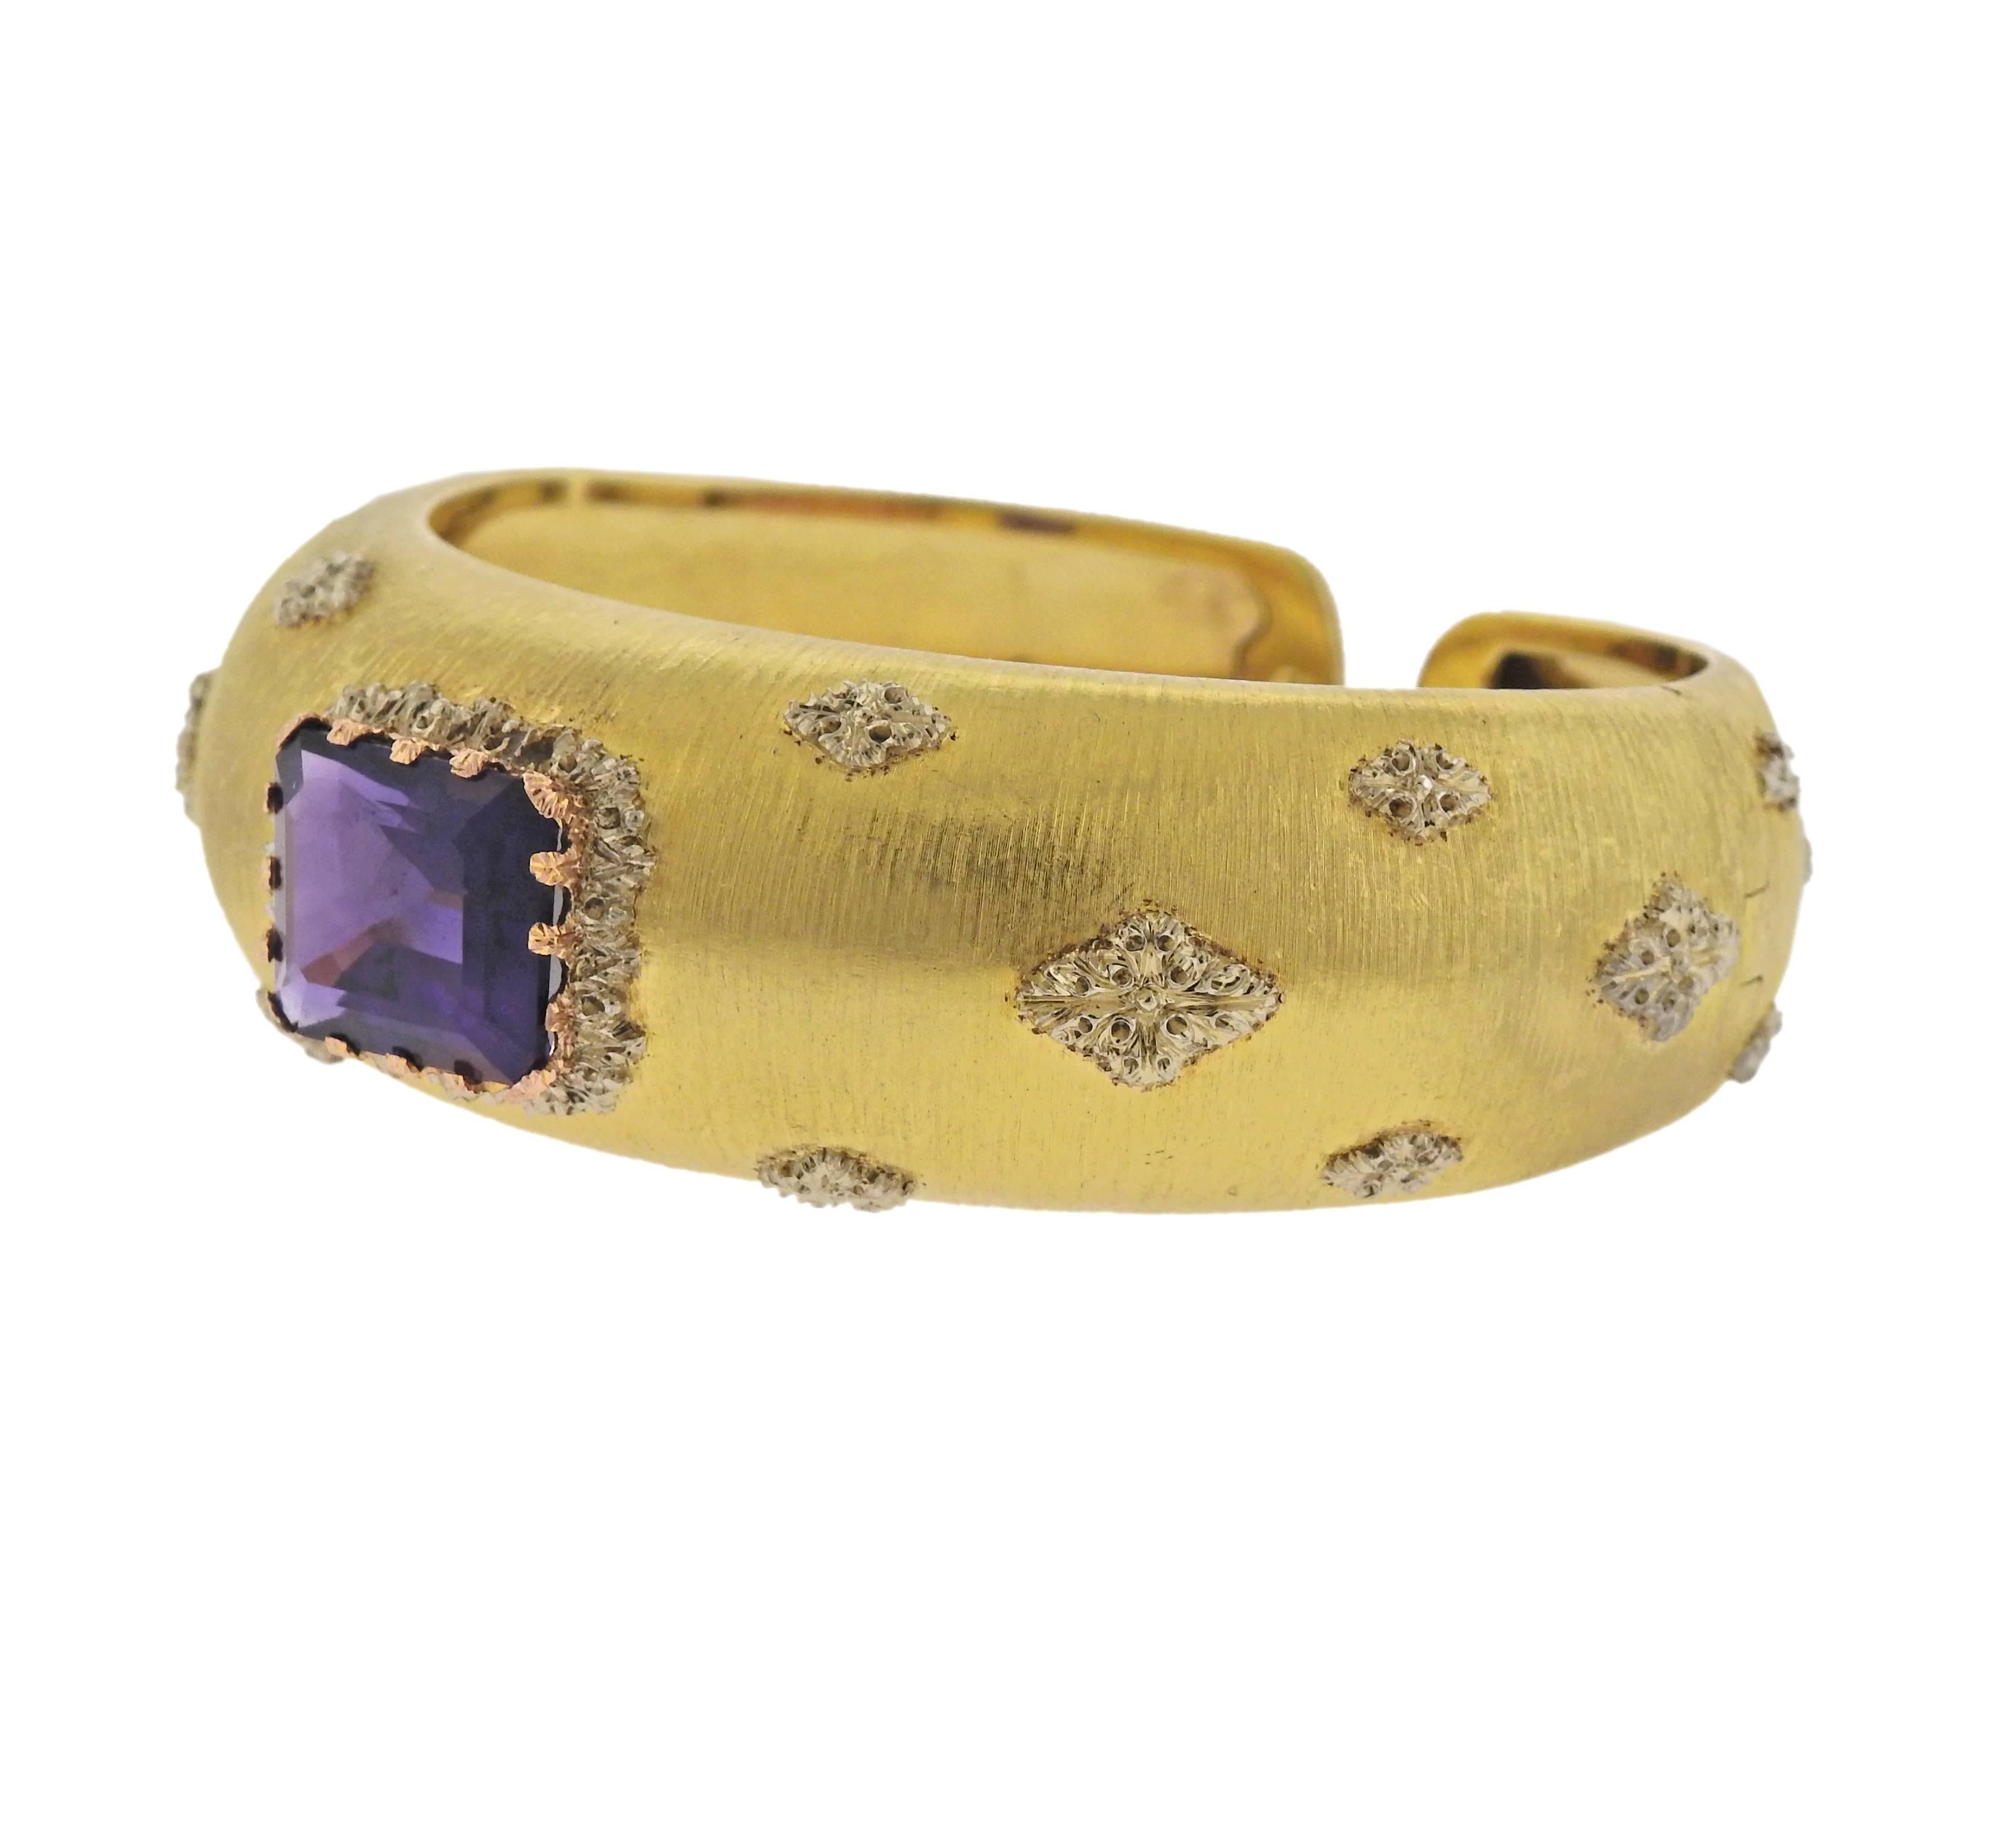 18k yellow gold cuff bracelet by Buccellati, featuring approx. 10ct amethyst. Bracelet will fit approx. 6.75